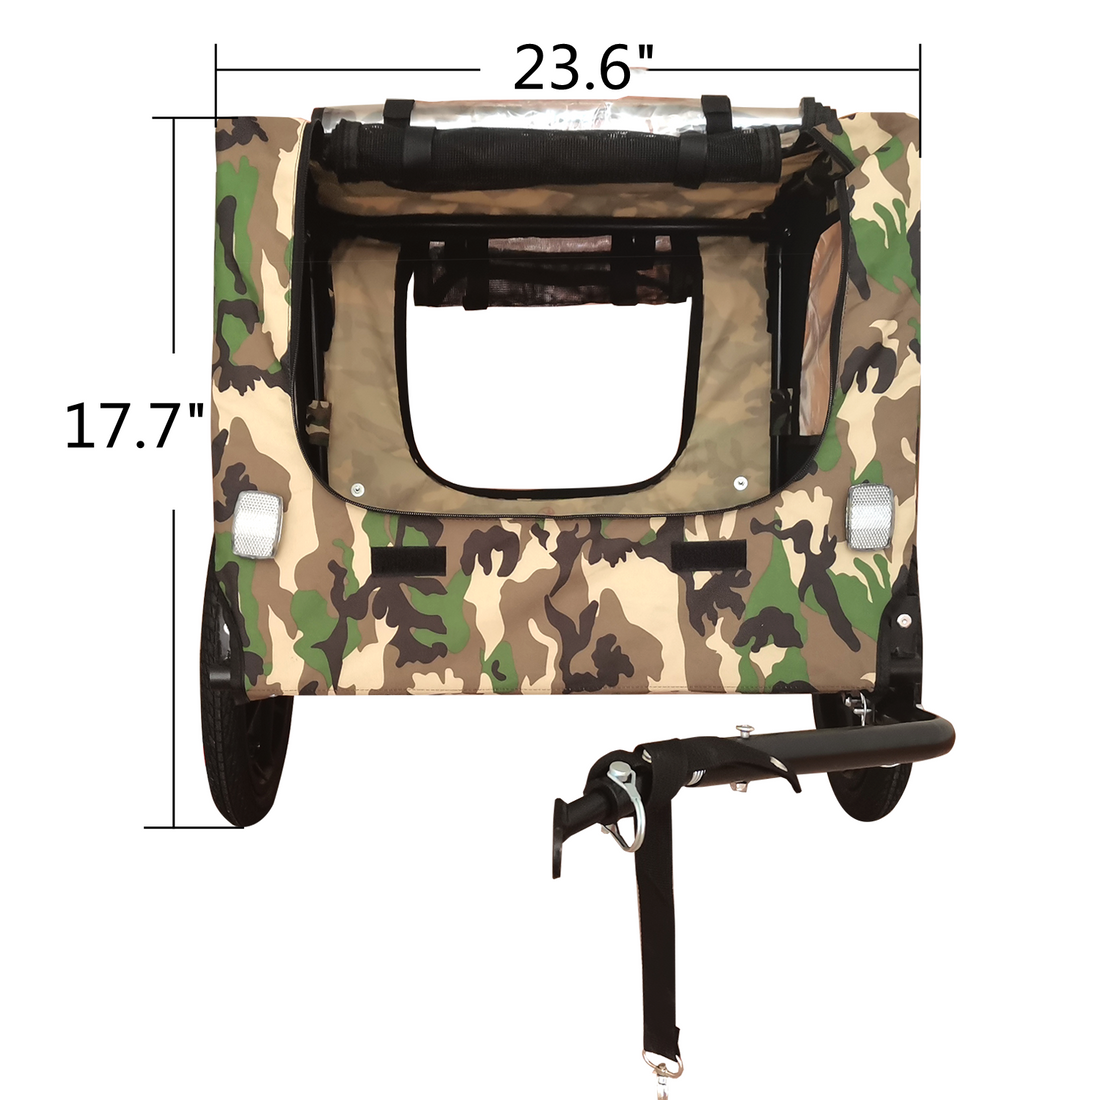 Camouflage Foldable Bicycle Trailer Bike Trailer